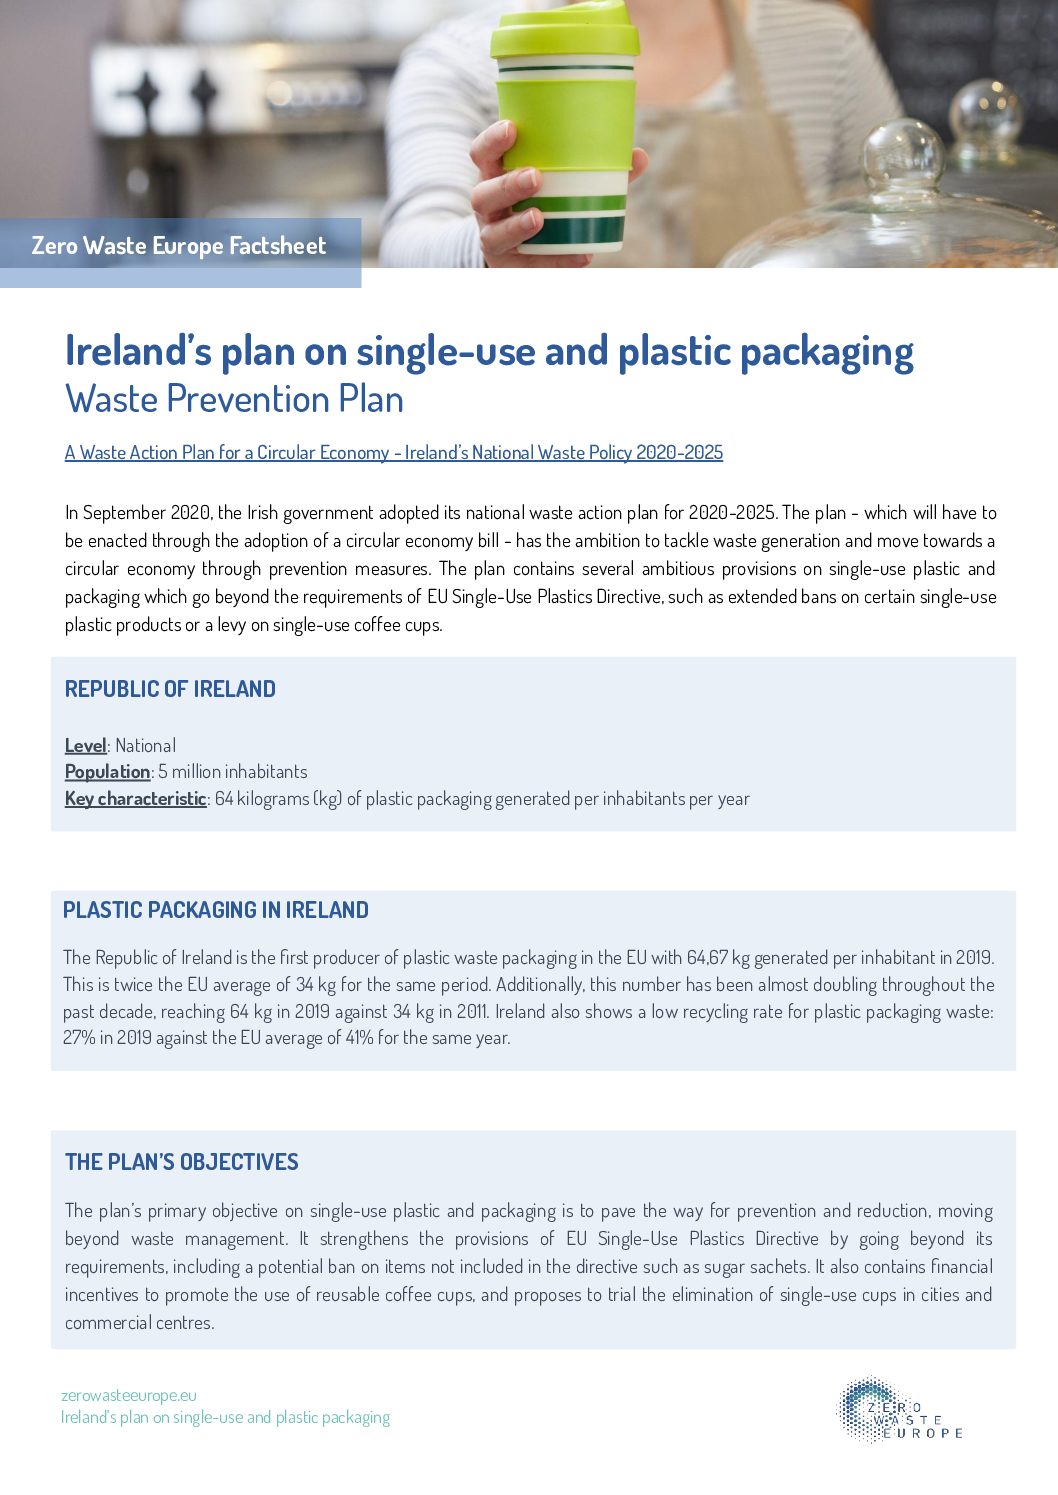 Ireland’s plan on single-use and plastic packaging